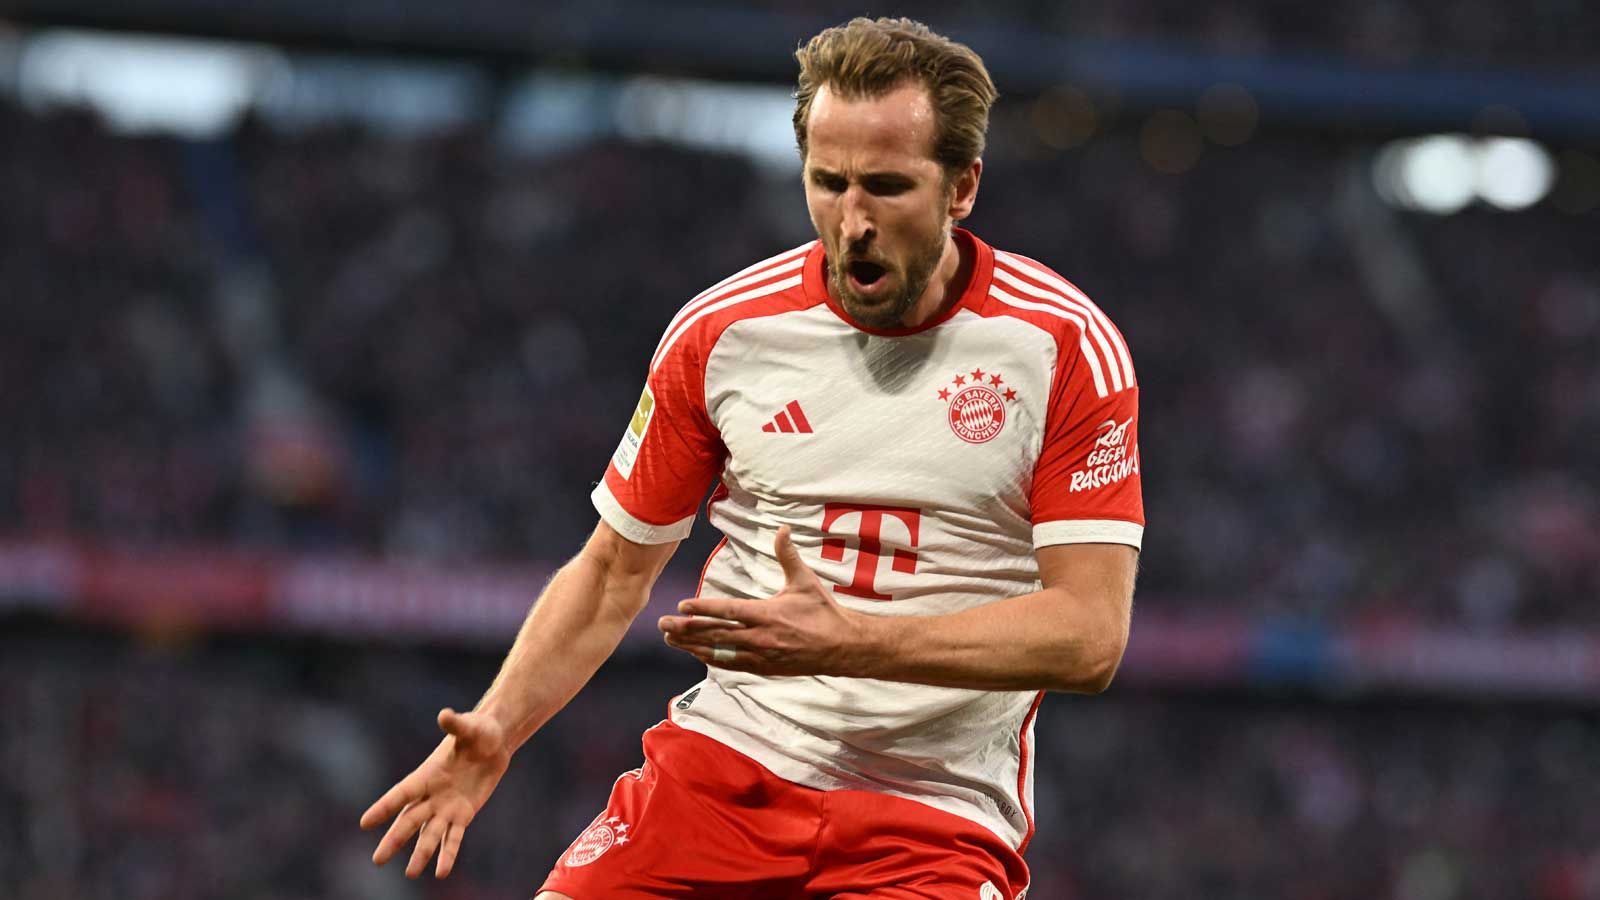 Beating Arsenal is 'in Harry Kane's DNA'! Bayern Munich star explains why he'll 'always have point' to prove against Gunners ahead of huge Champions League quarter-final second leg